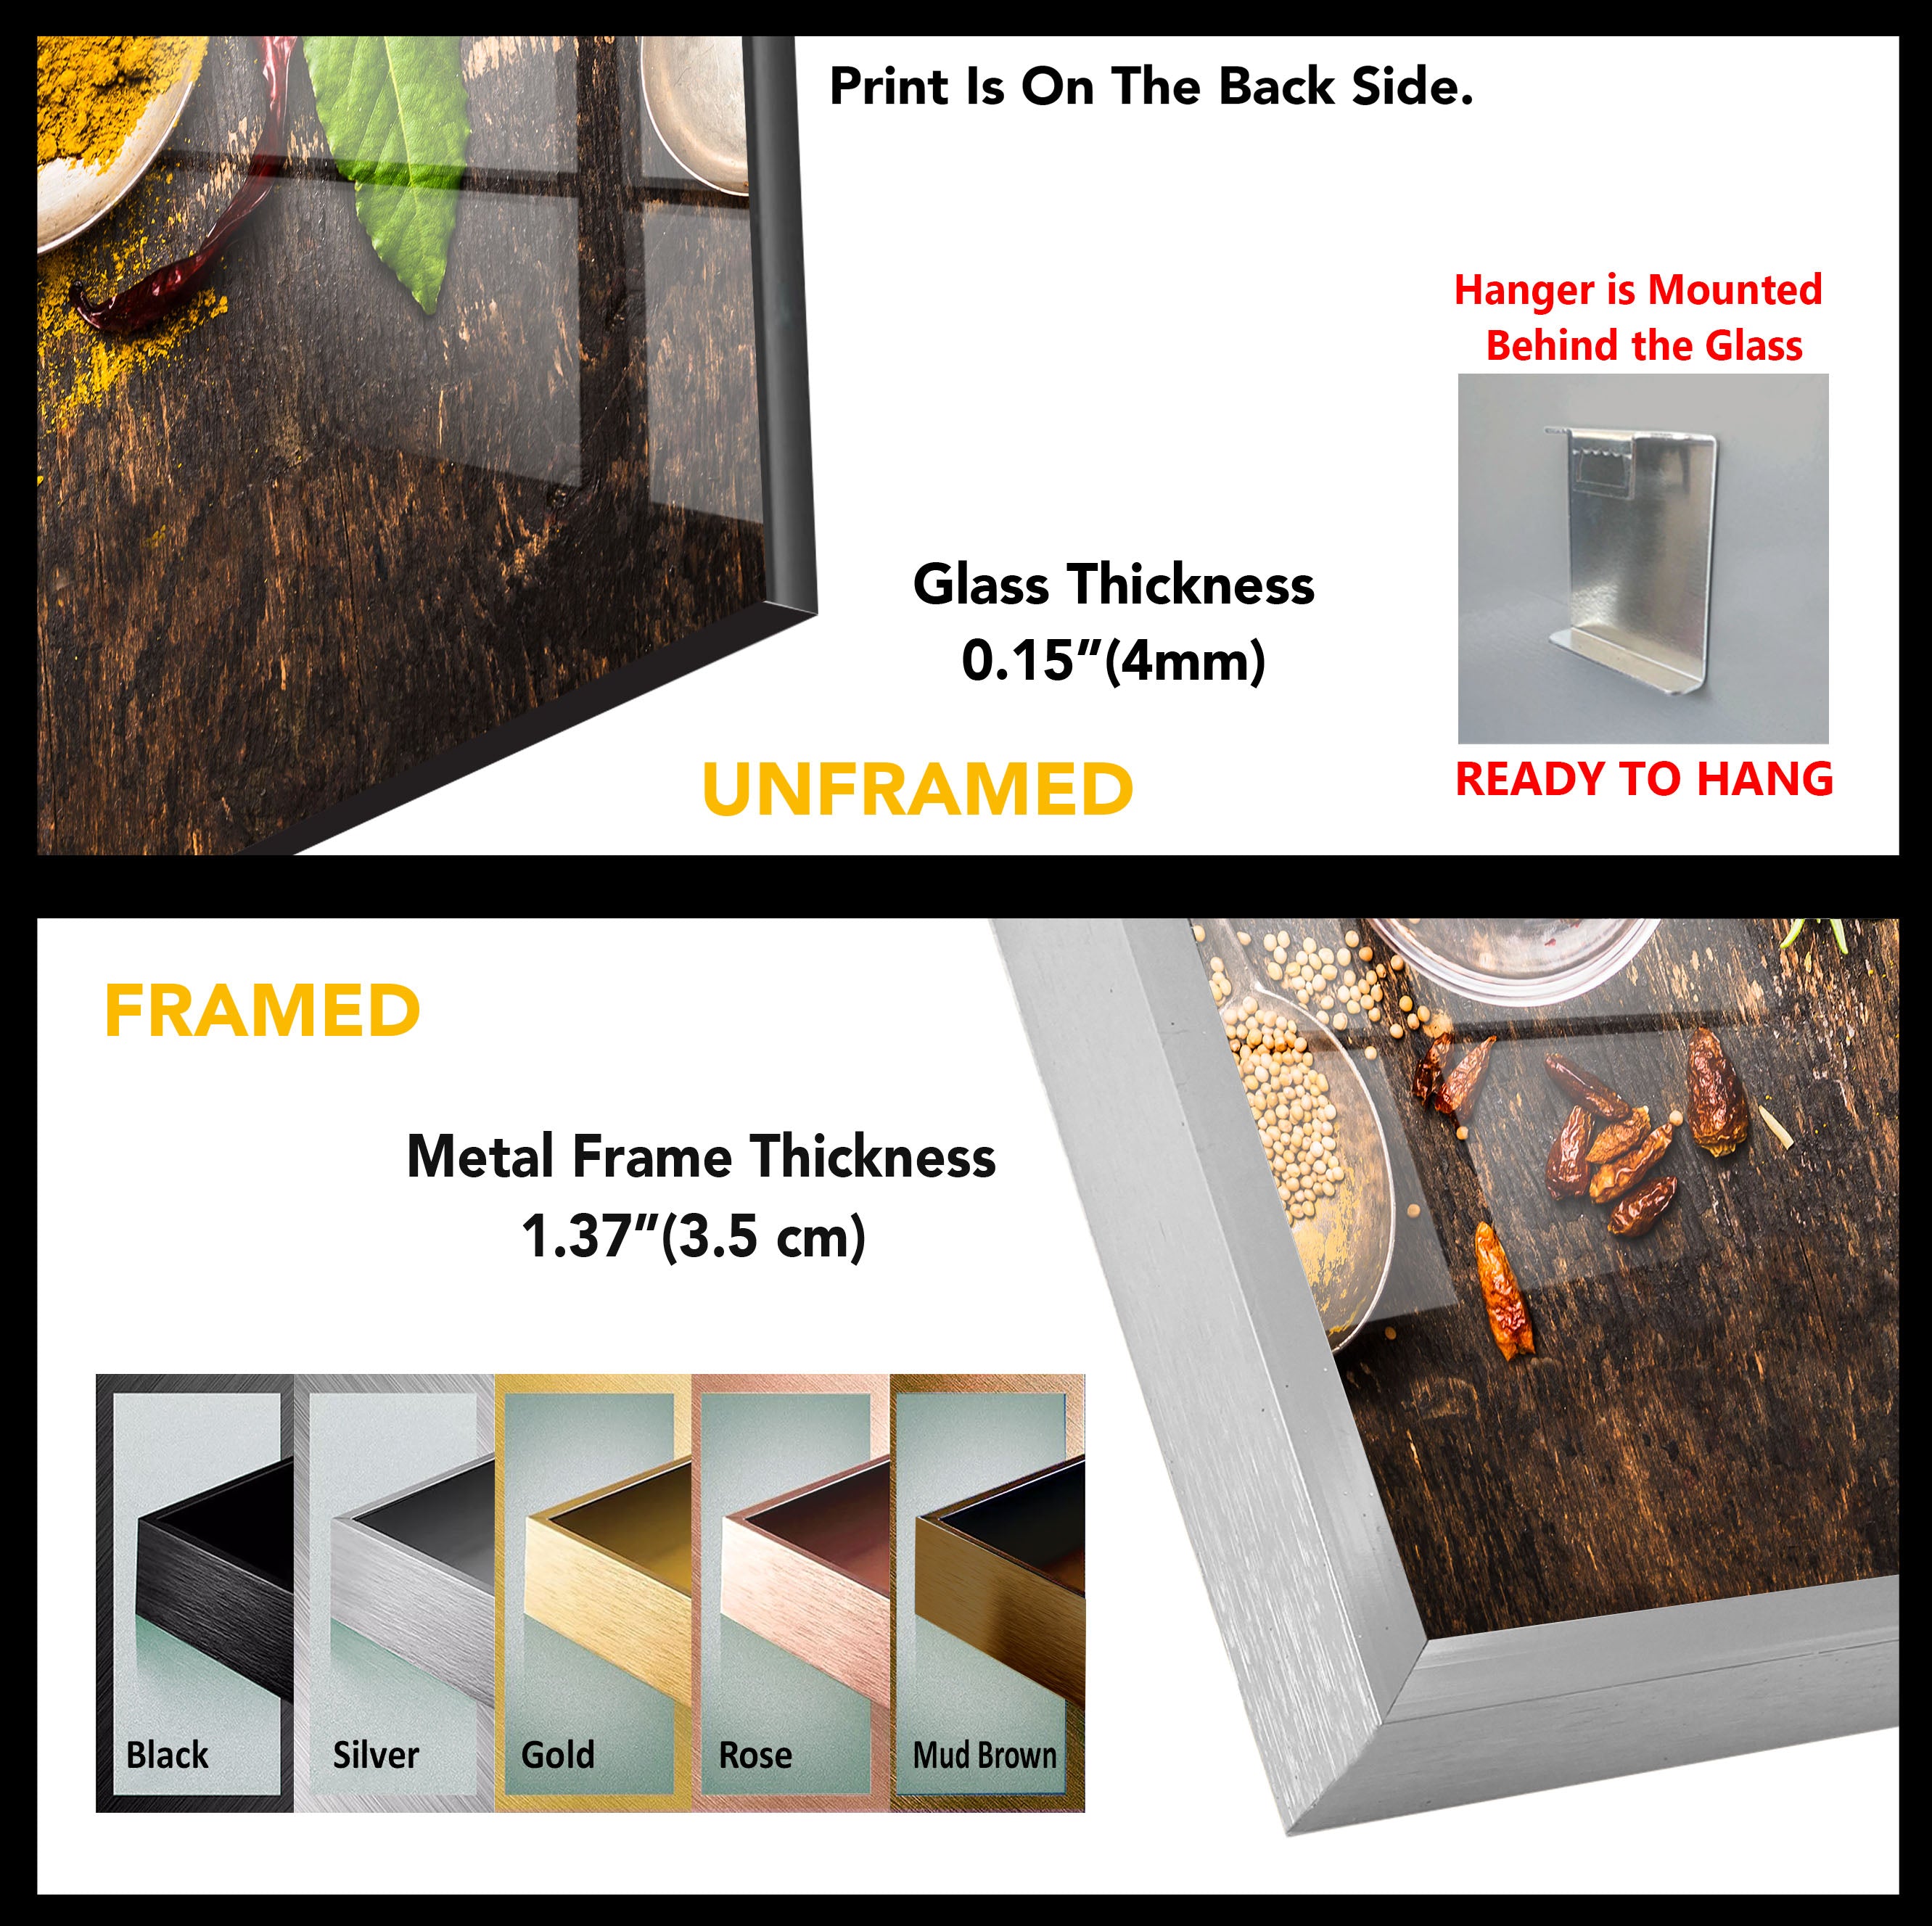 Spices Kitchen Tempered Glass Wall Art